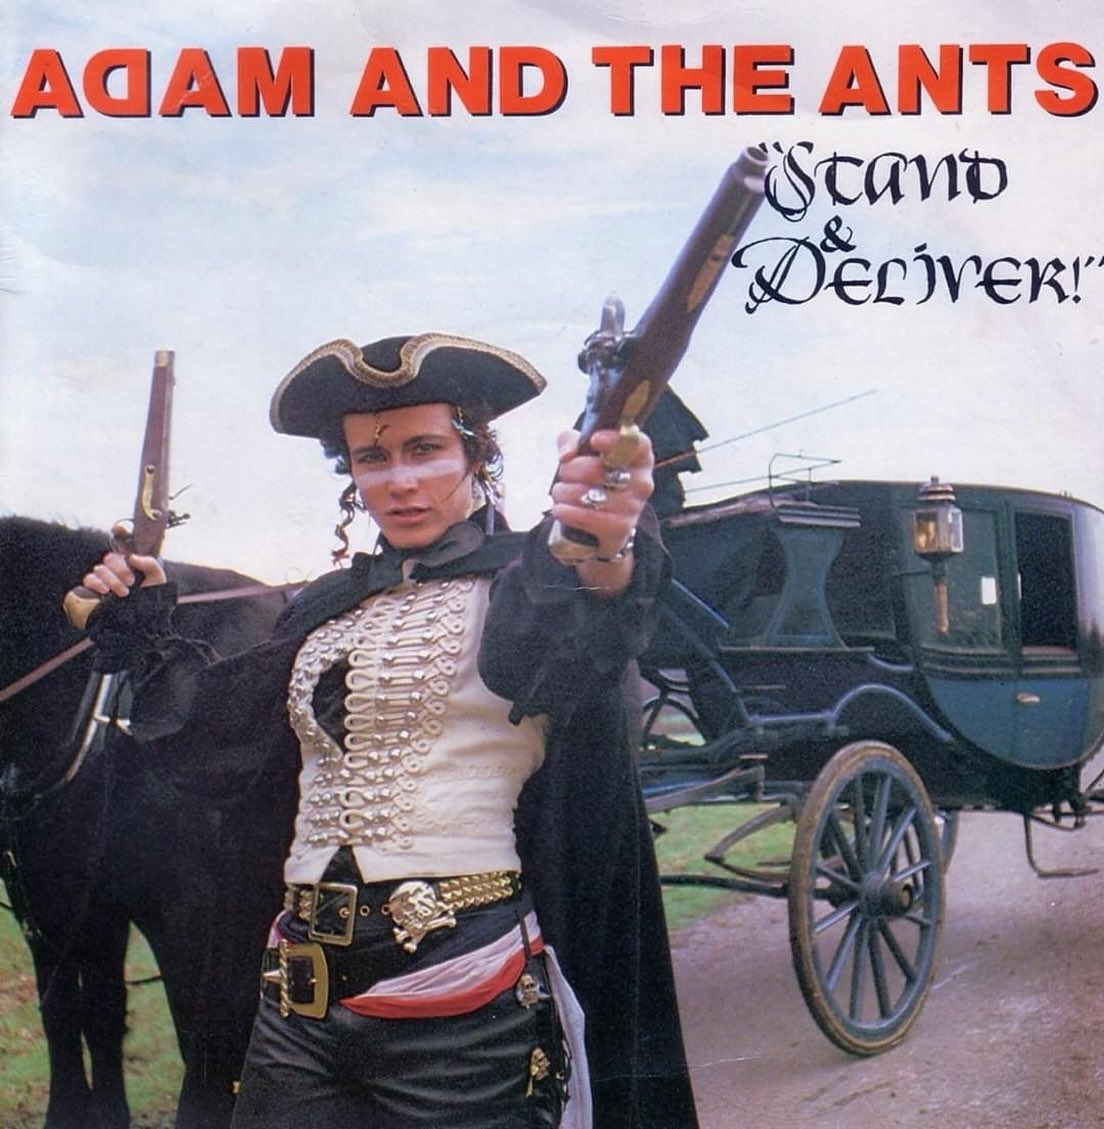 #AdamAndTheAnts ‘Stand And Deliver’ from the album ‘Prince Charming’ and released as a single today in 1981 

‘Even though you fool your soul
Your conscience will be mine’

youtu.be/4B2a6l6wM2k?si… via @YouTube